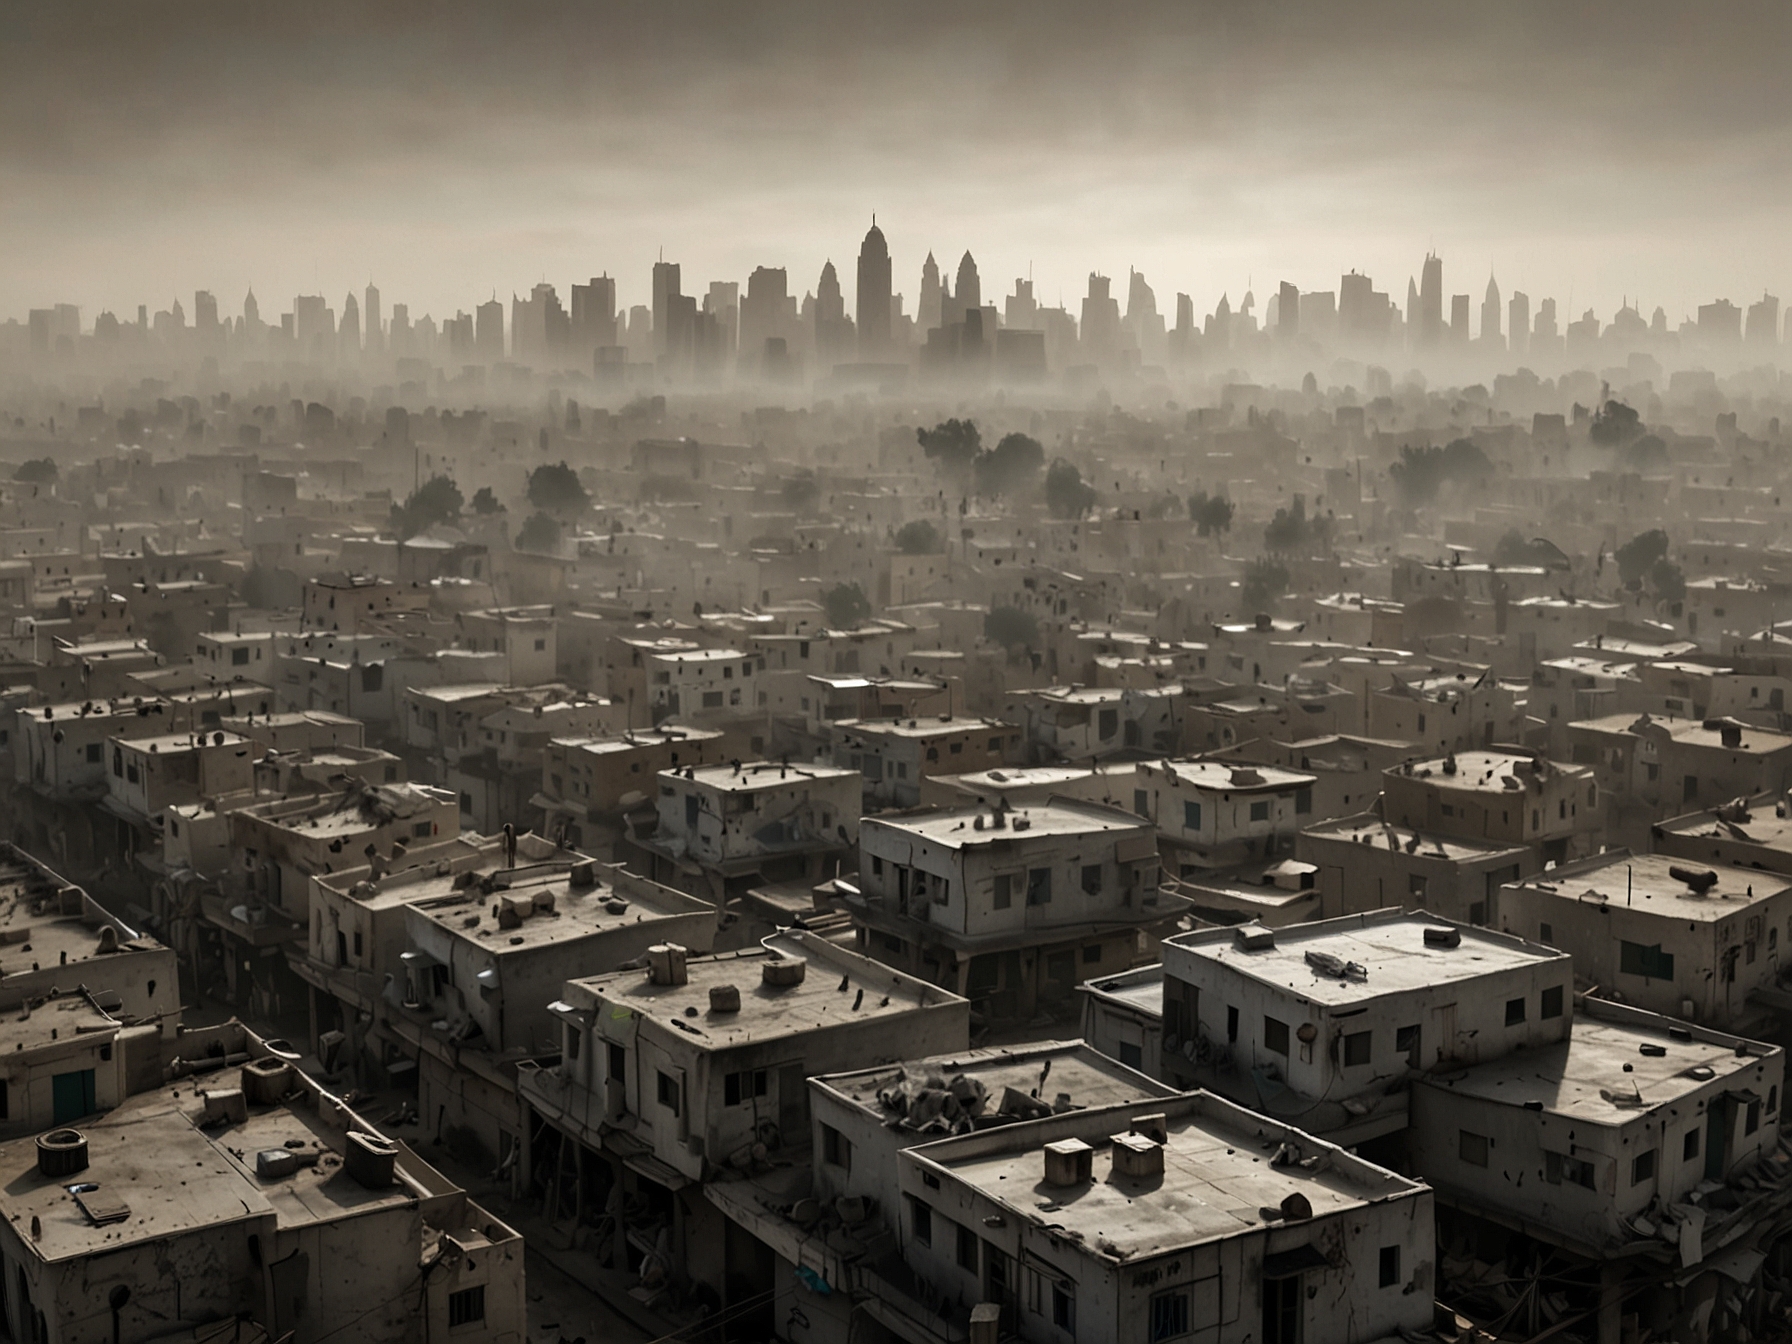 A densely populated Indian city covered in smog, illustrating the severe air pollution problem and the urgent need for stricter air quality standards and sustainable practices.